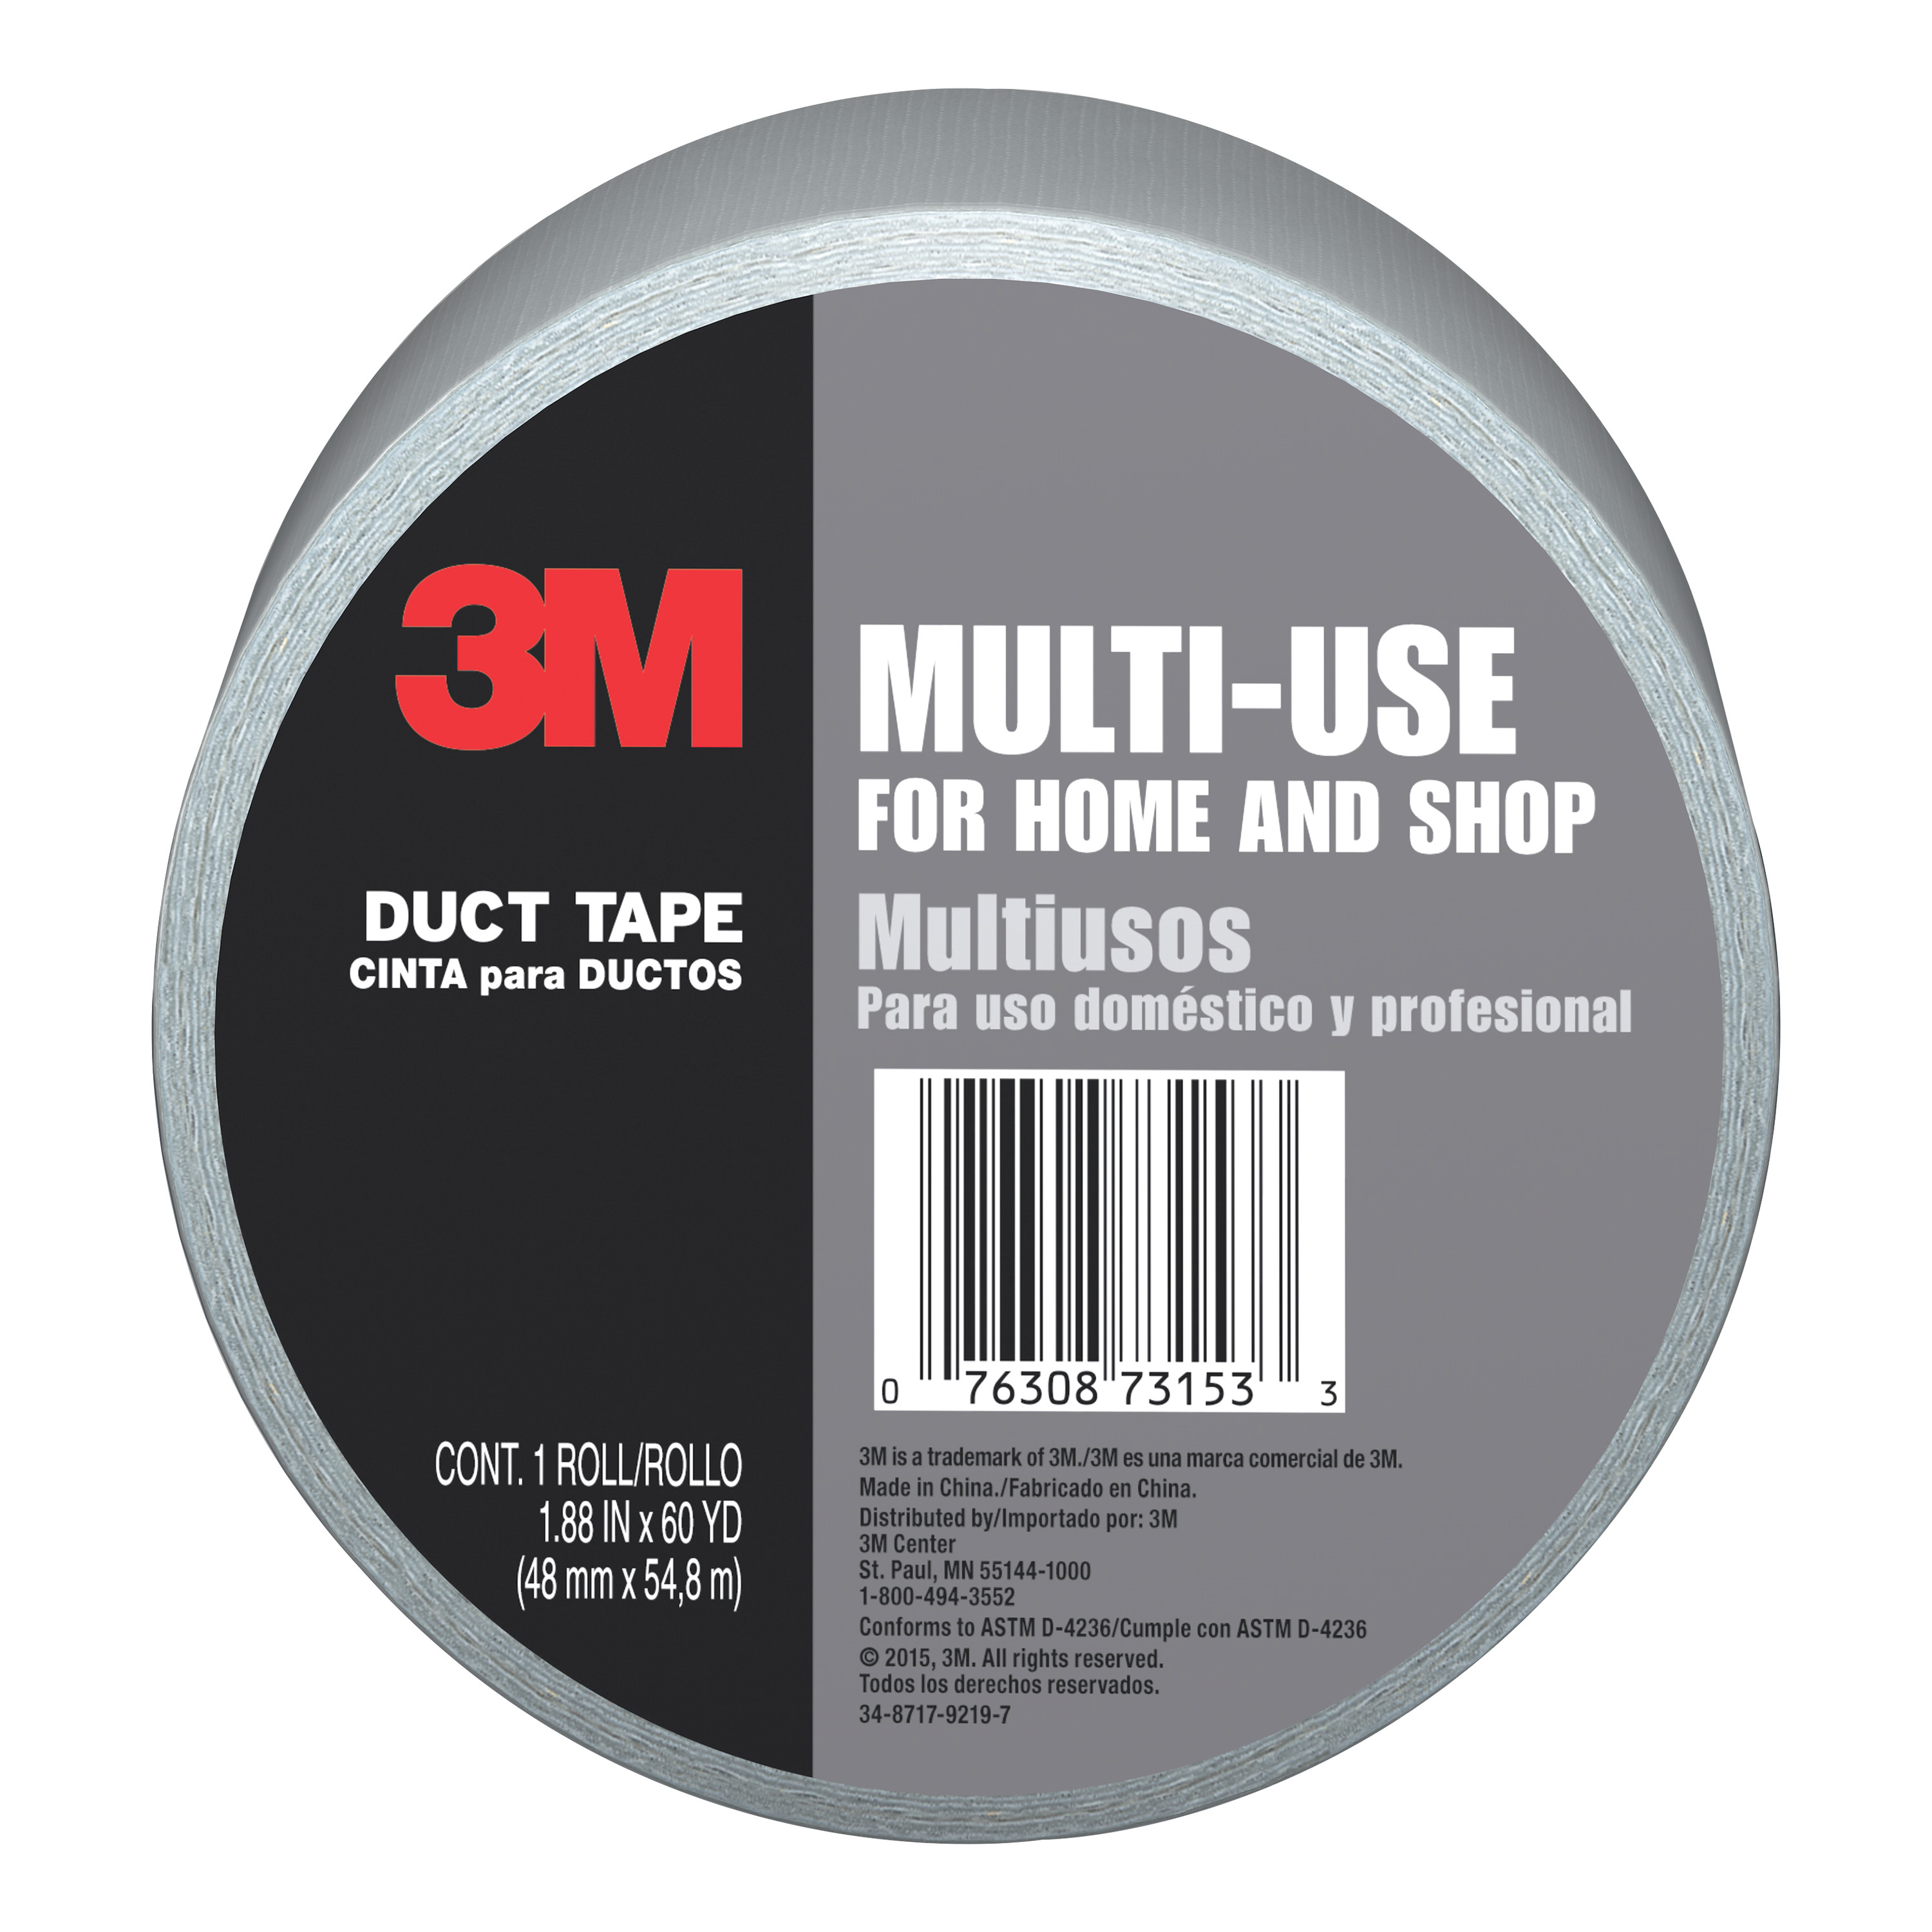 3M™ Multi-Use Duct Tape 2900, 1.88 in x 60 yd (48 mm x 54,8 m)